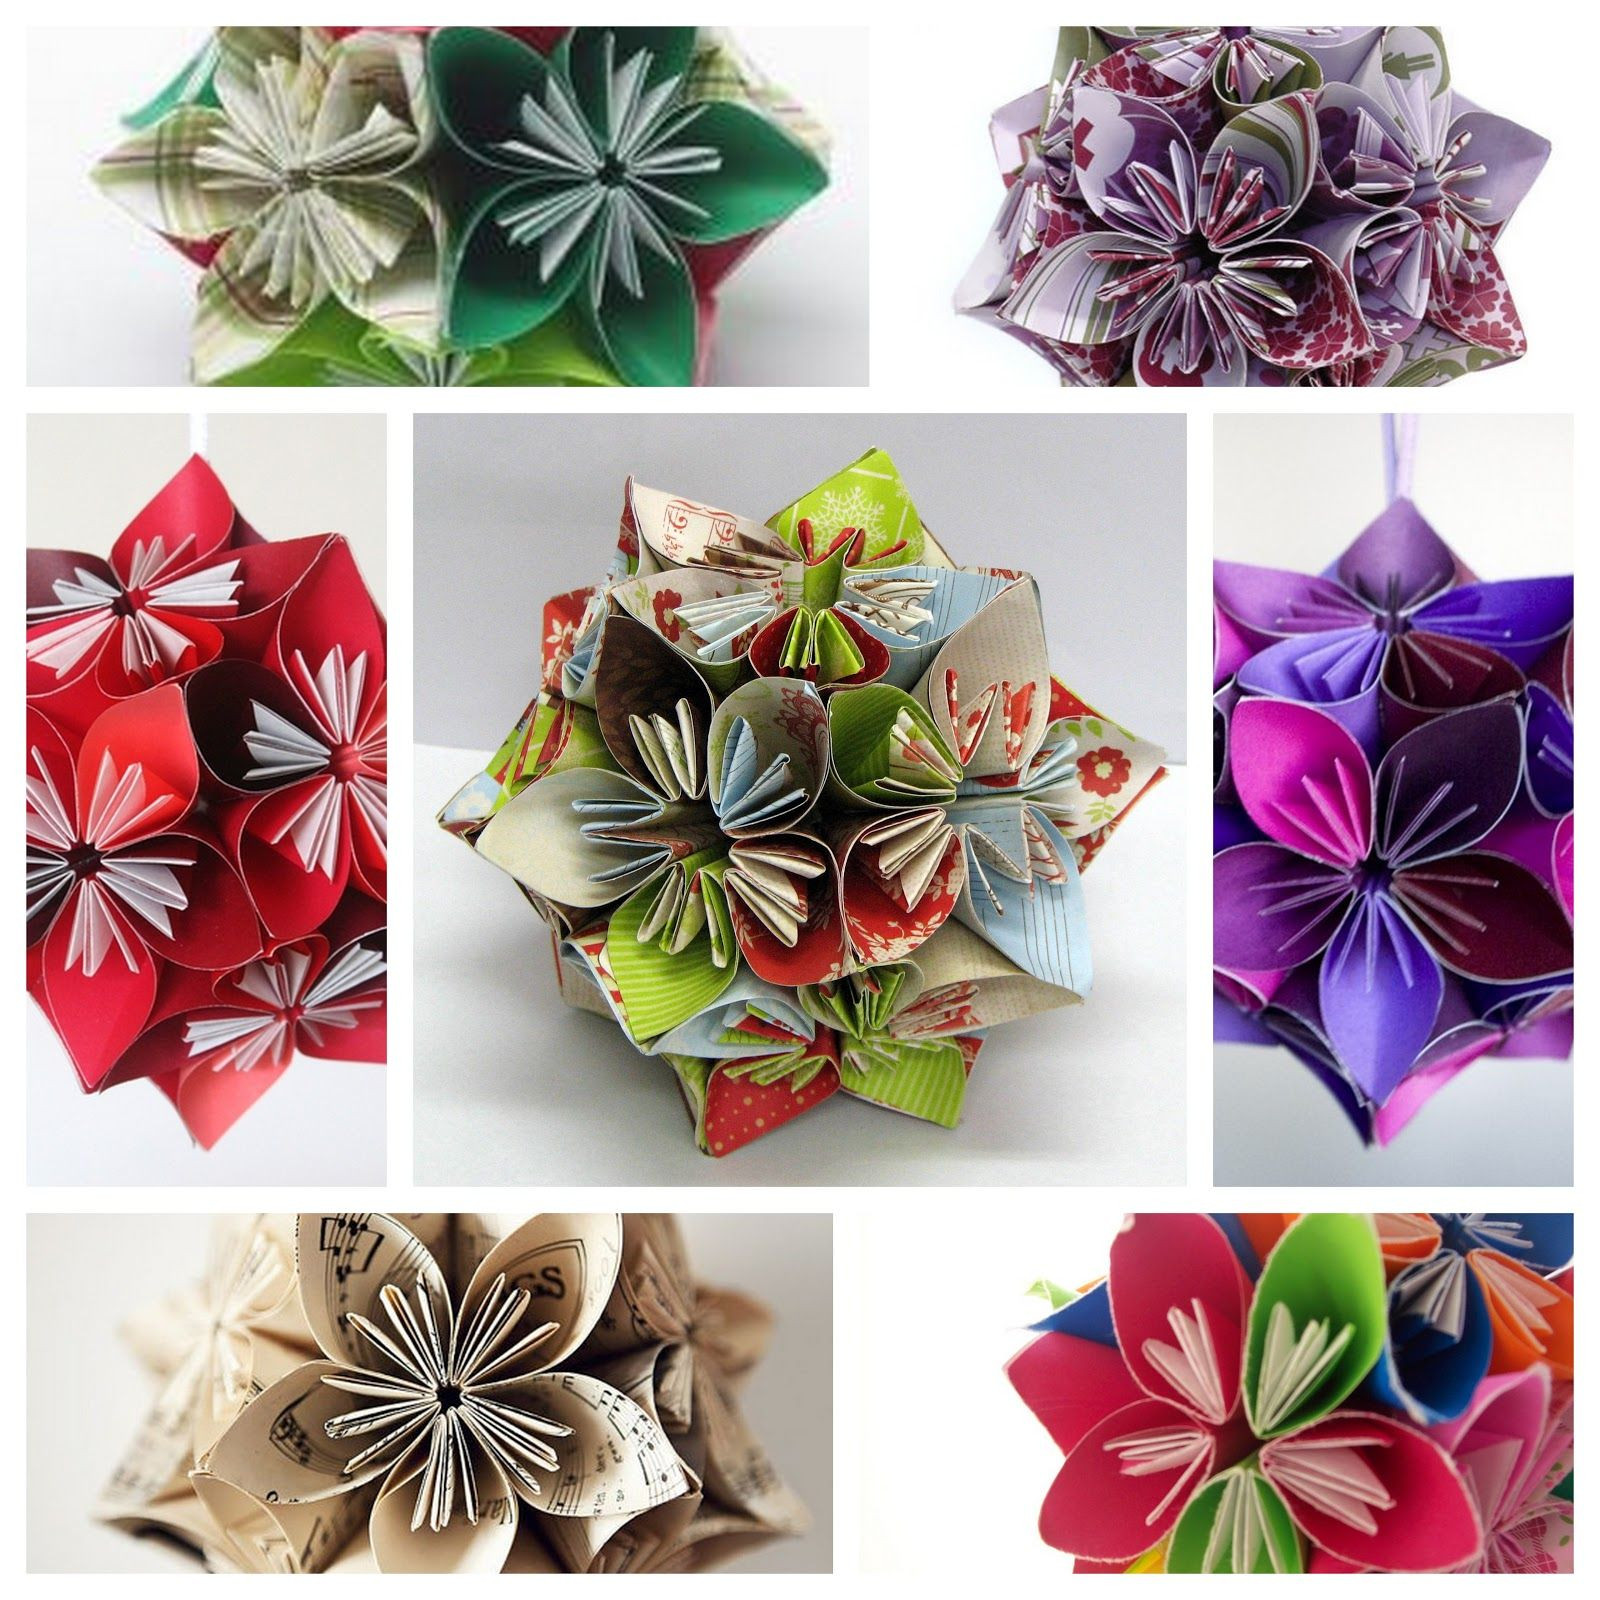 New Craft Ideas For Adults
 Christmas Paper Crafts For Adults